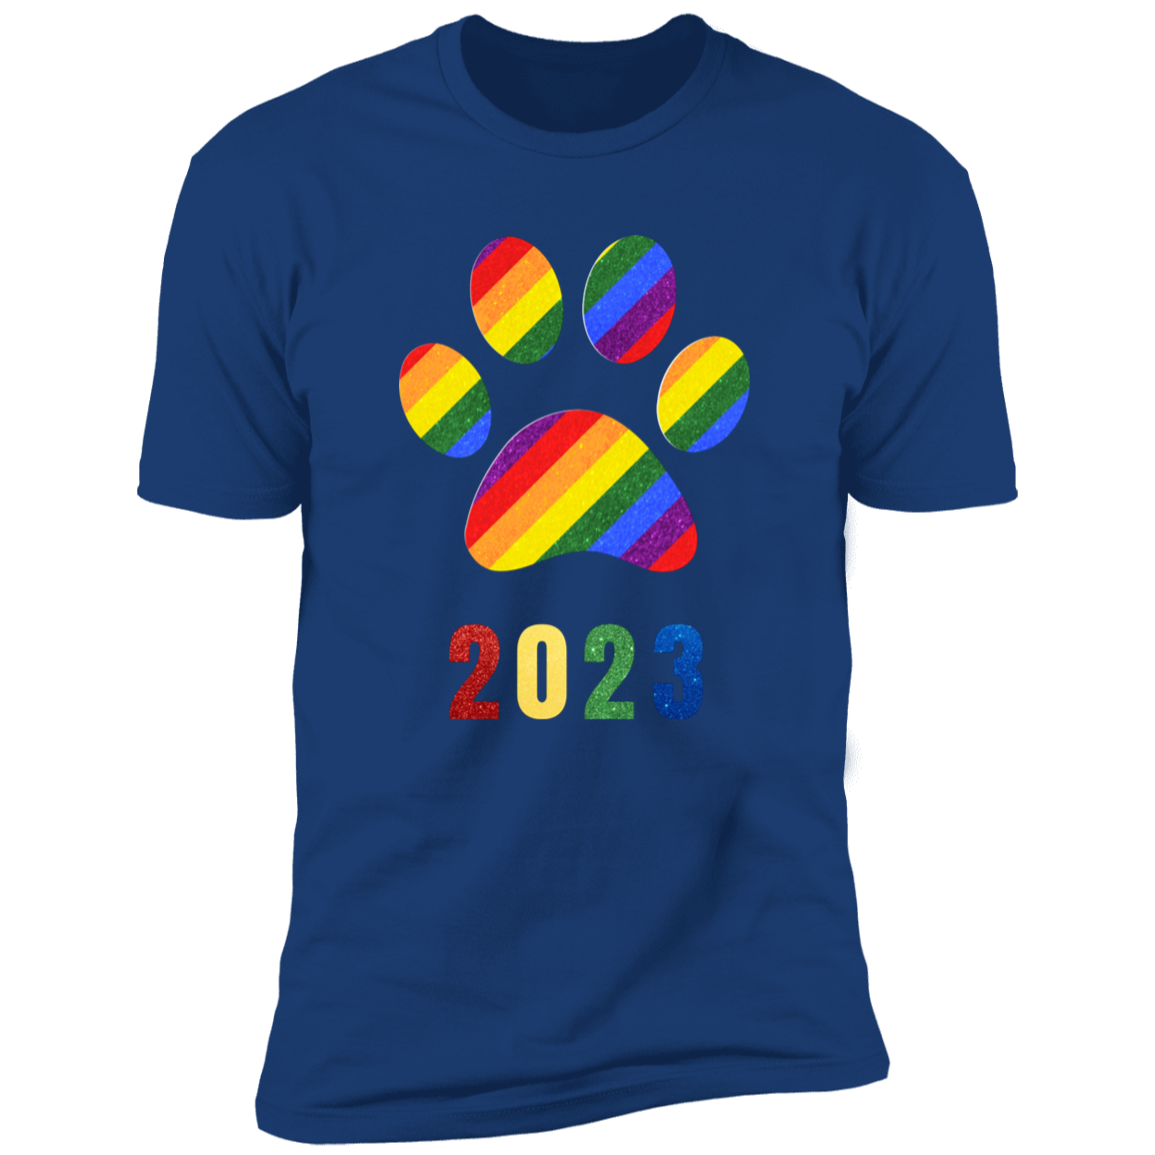 Pride Paw 2023 (Sparkles) Pride T-shirt, Paw Pride Dog Shirt for humans, in royal blue